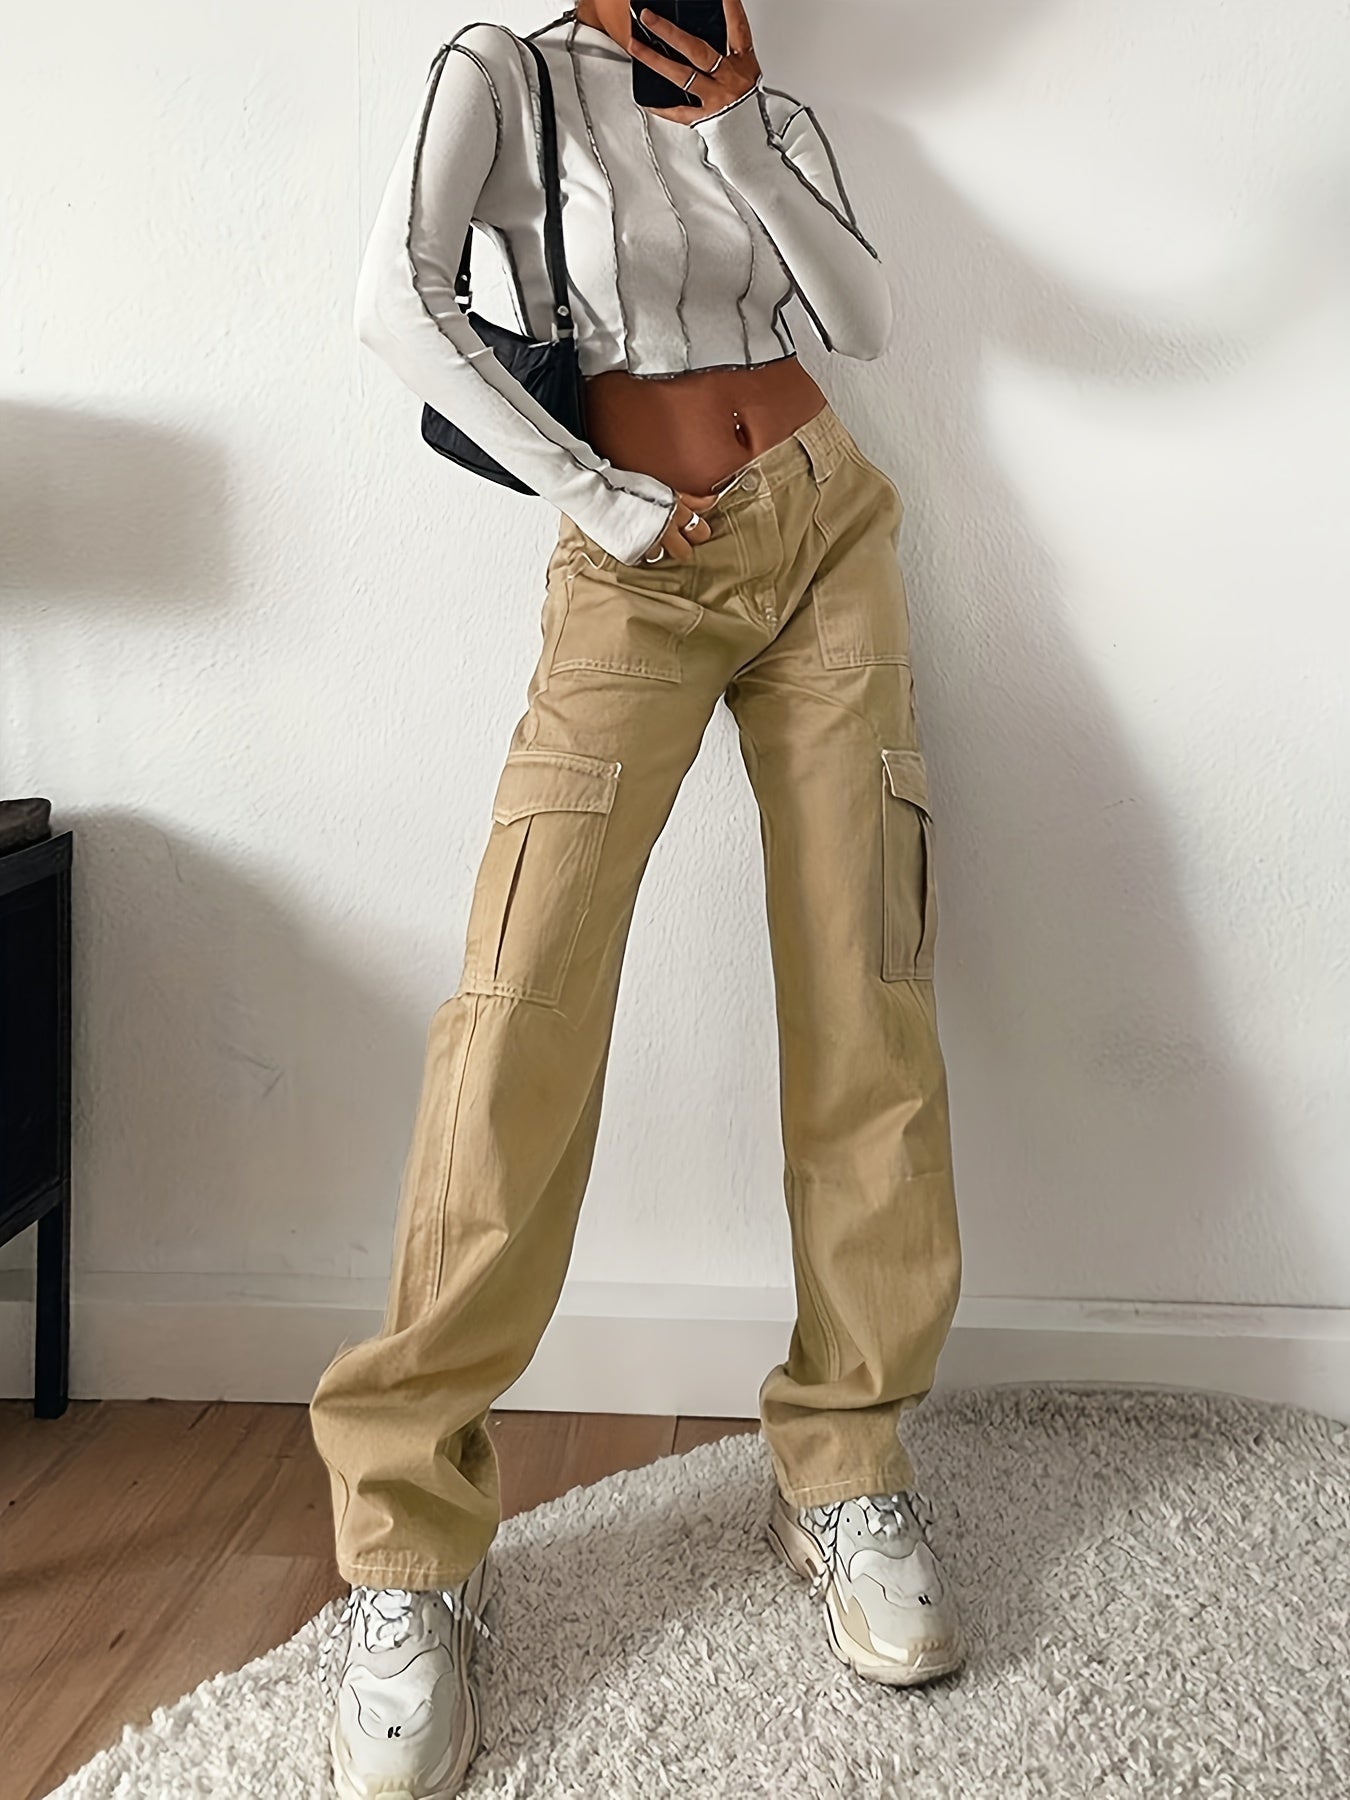 「lovevop」Loose Fit Cargo Pants, Flap Pockets Non-Stretch Solid Color Street Style Straight Jeans, Y2K Kpop Vintage Style, Women's Denim Jeans & Clothing